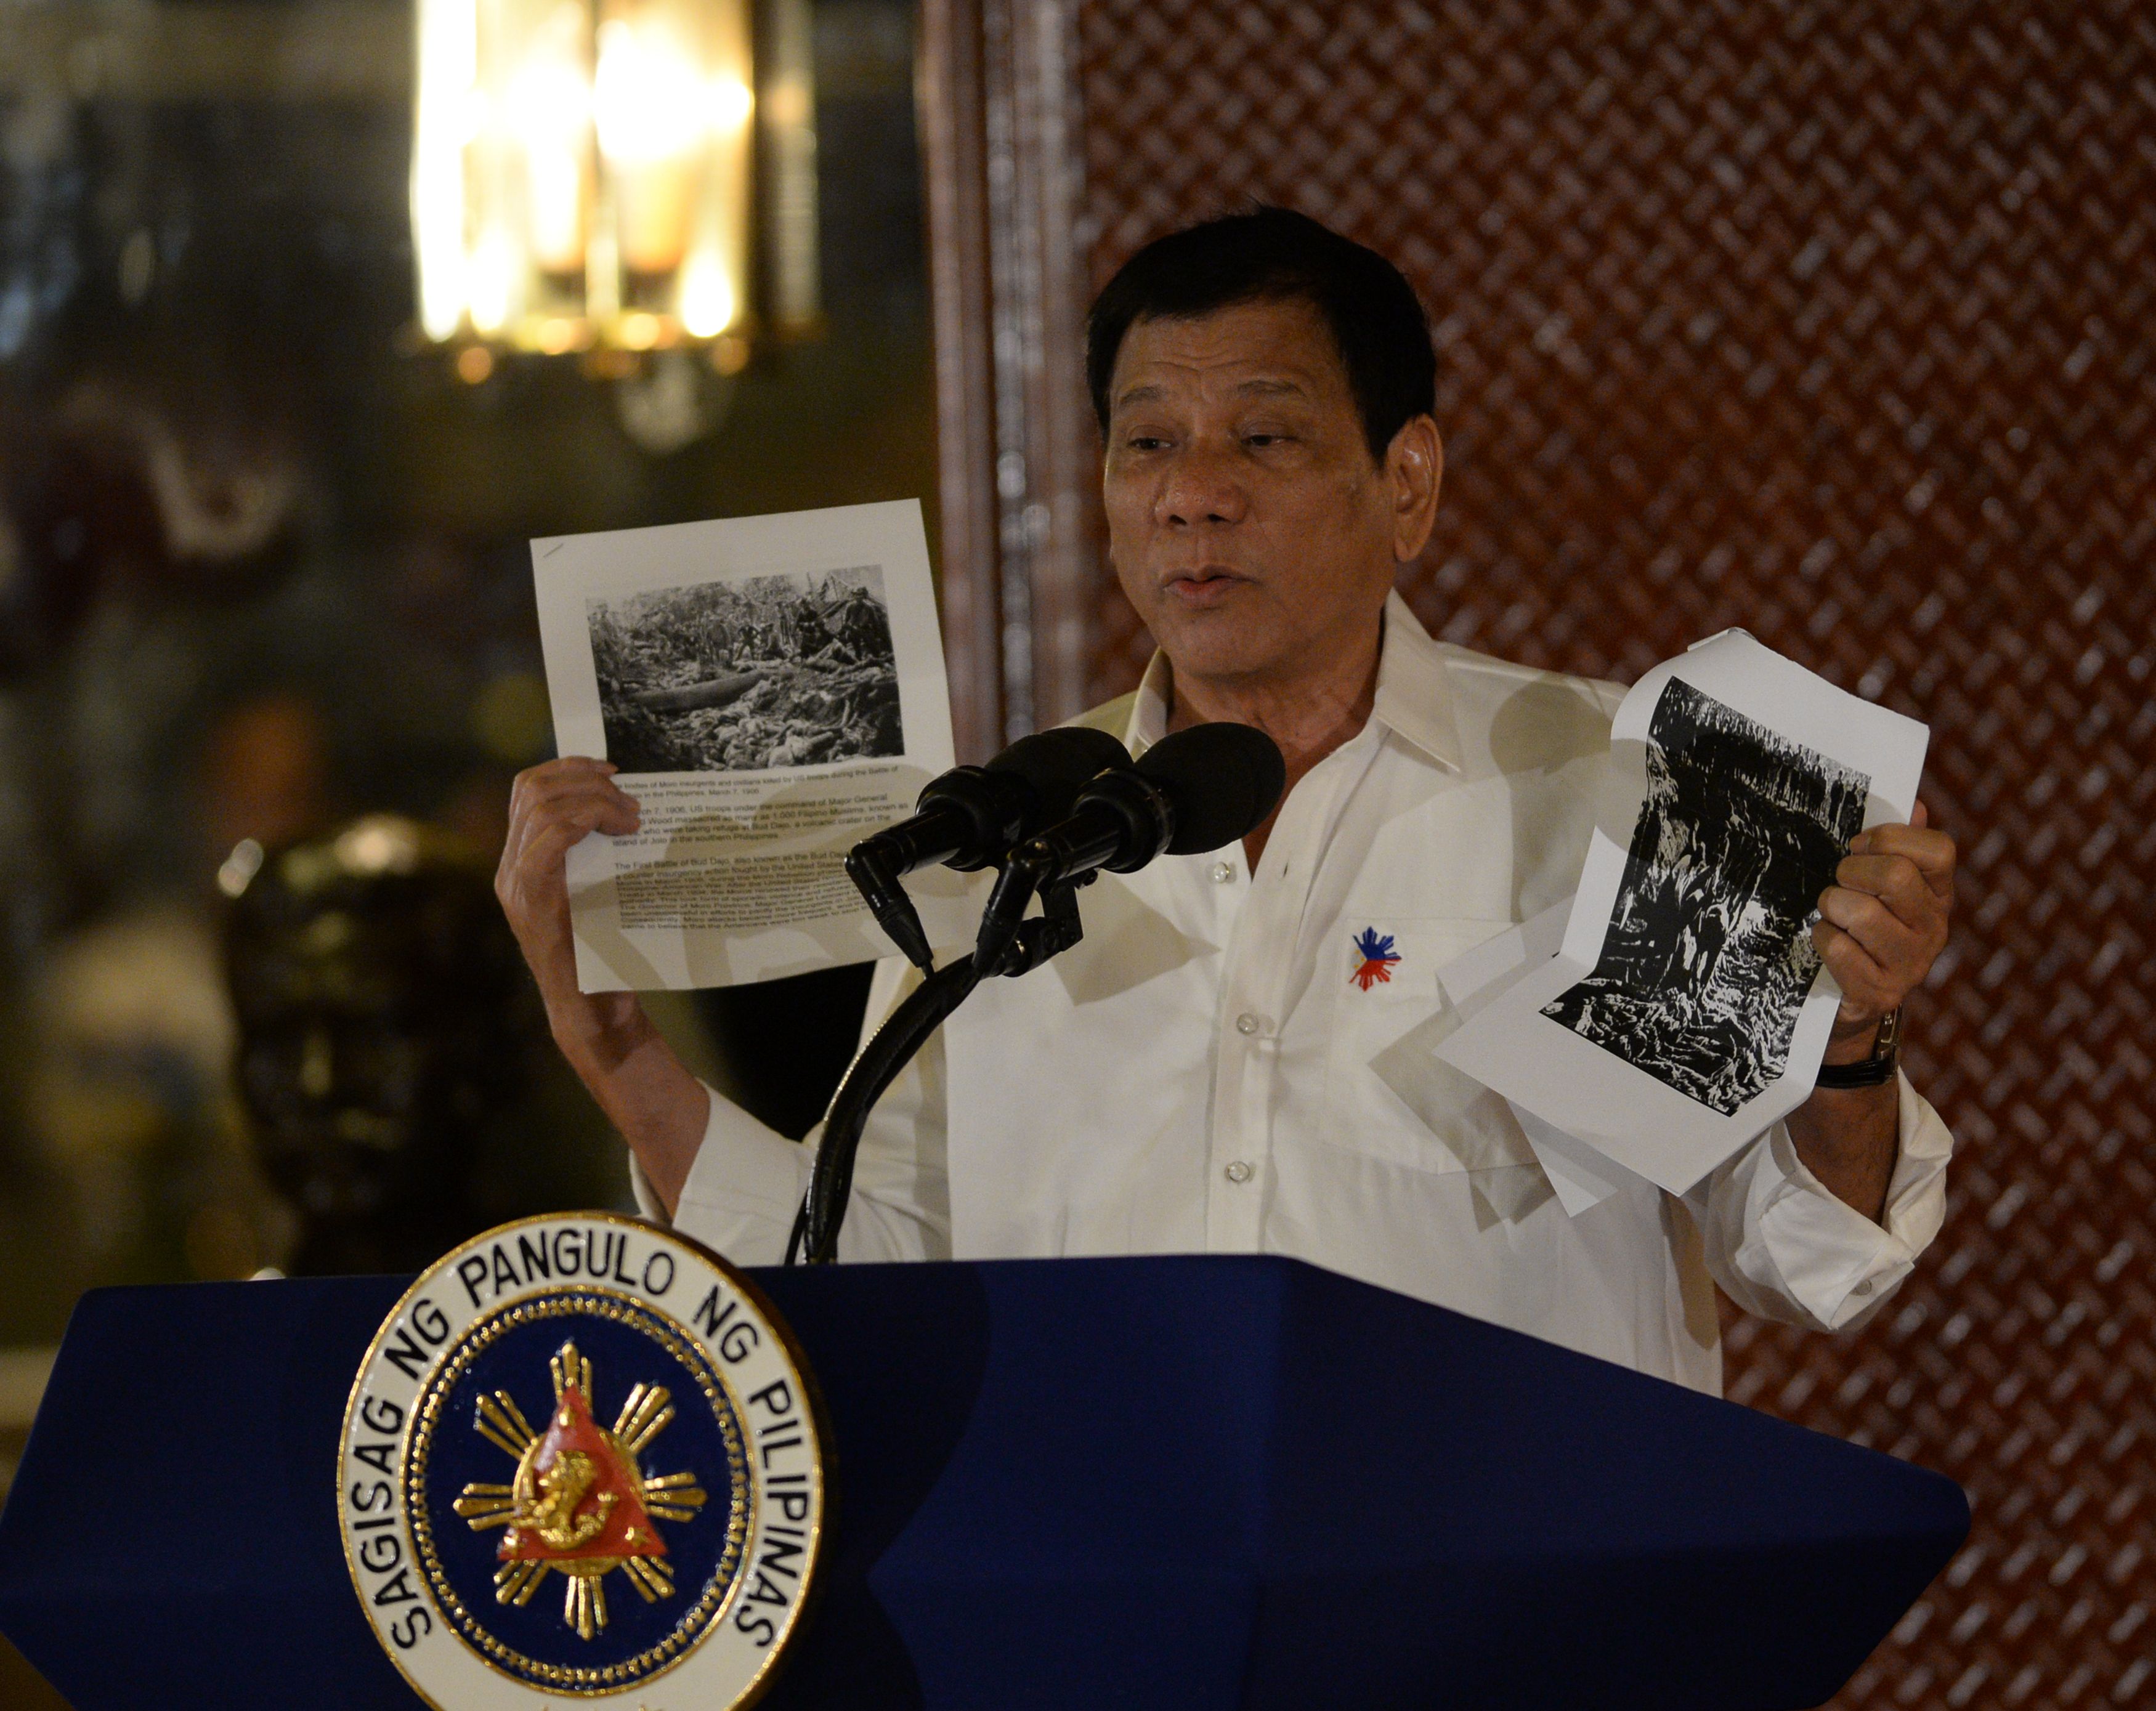 Philippine President Rodrigo Duterte in Manila on Sept. 12, 2016, cites accounts of U.S. troops who killed Muslims during the U.S.'s occupation of the Philippines in the early-1900s (Ted Aljibe—AFP/Getty Images)